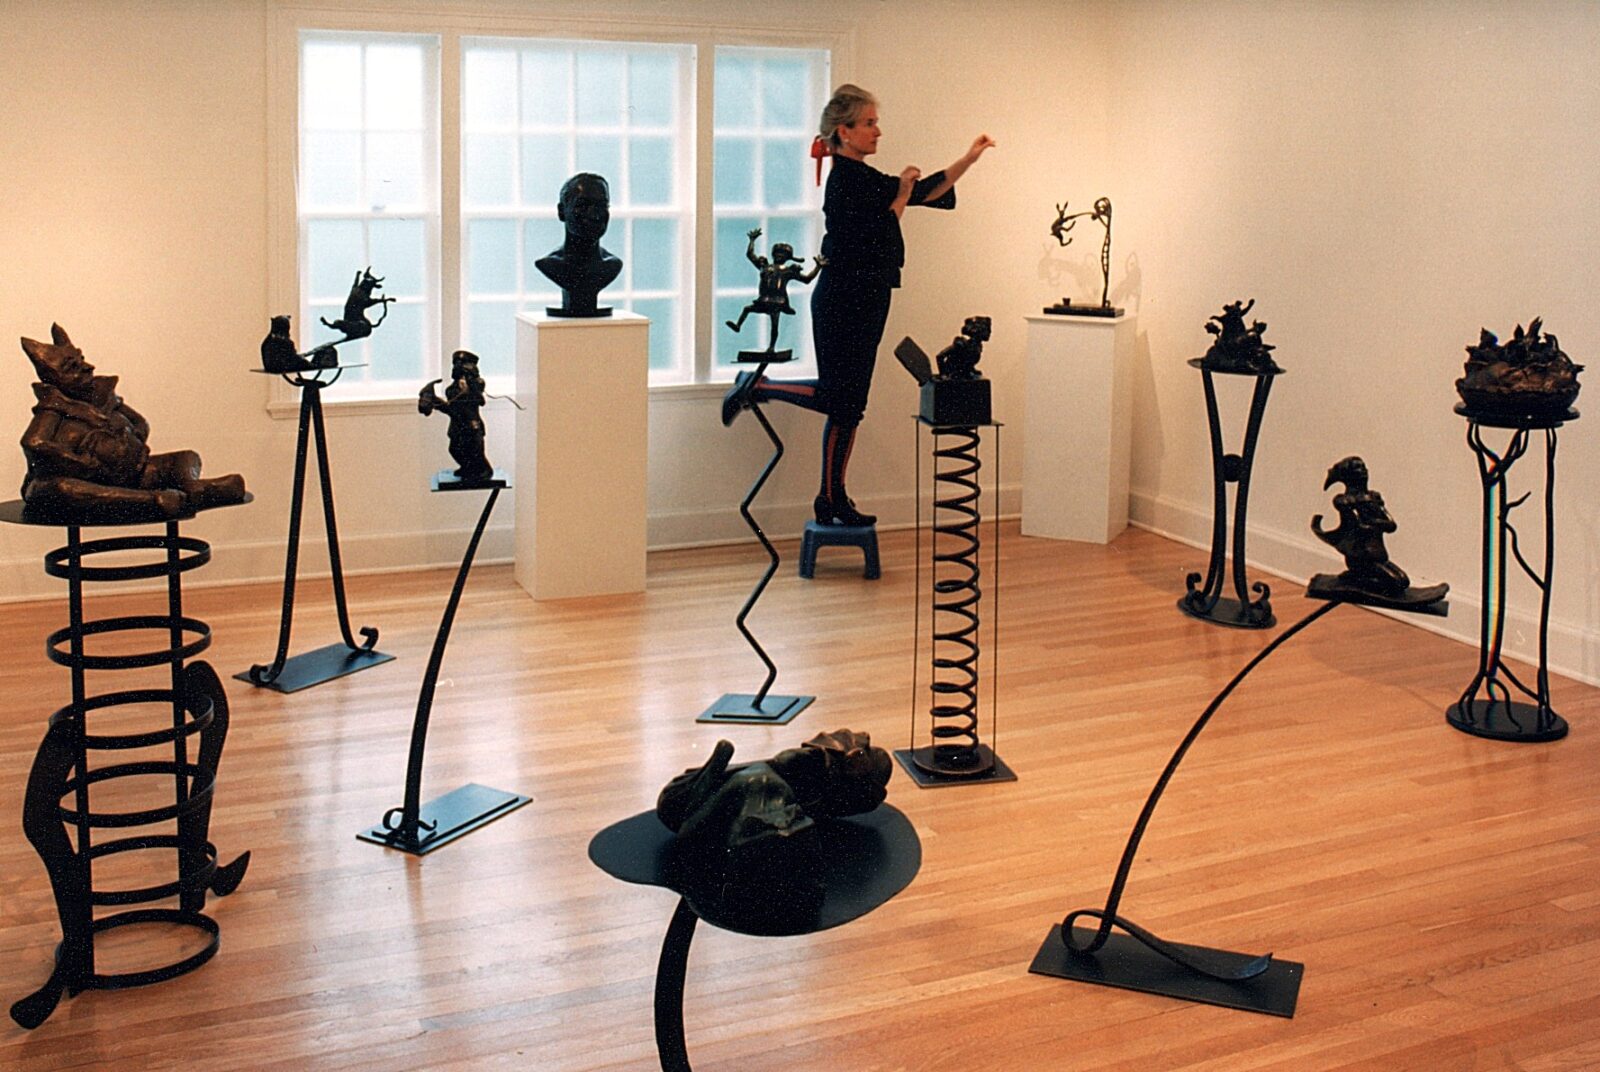 A woman standing in front of a room full of sculptures.